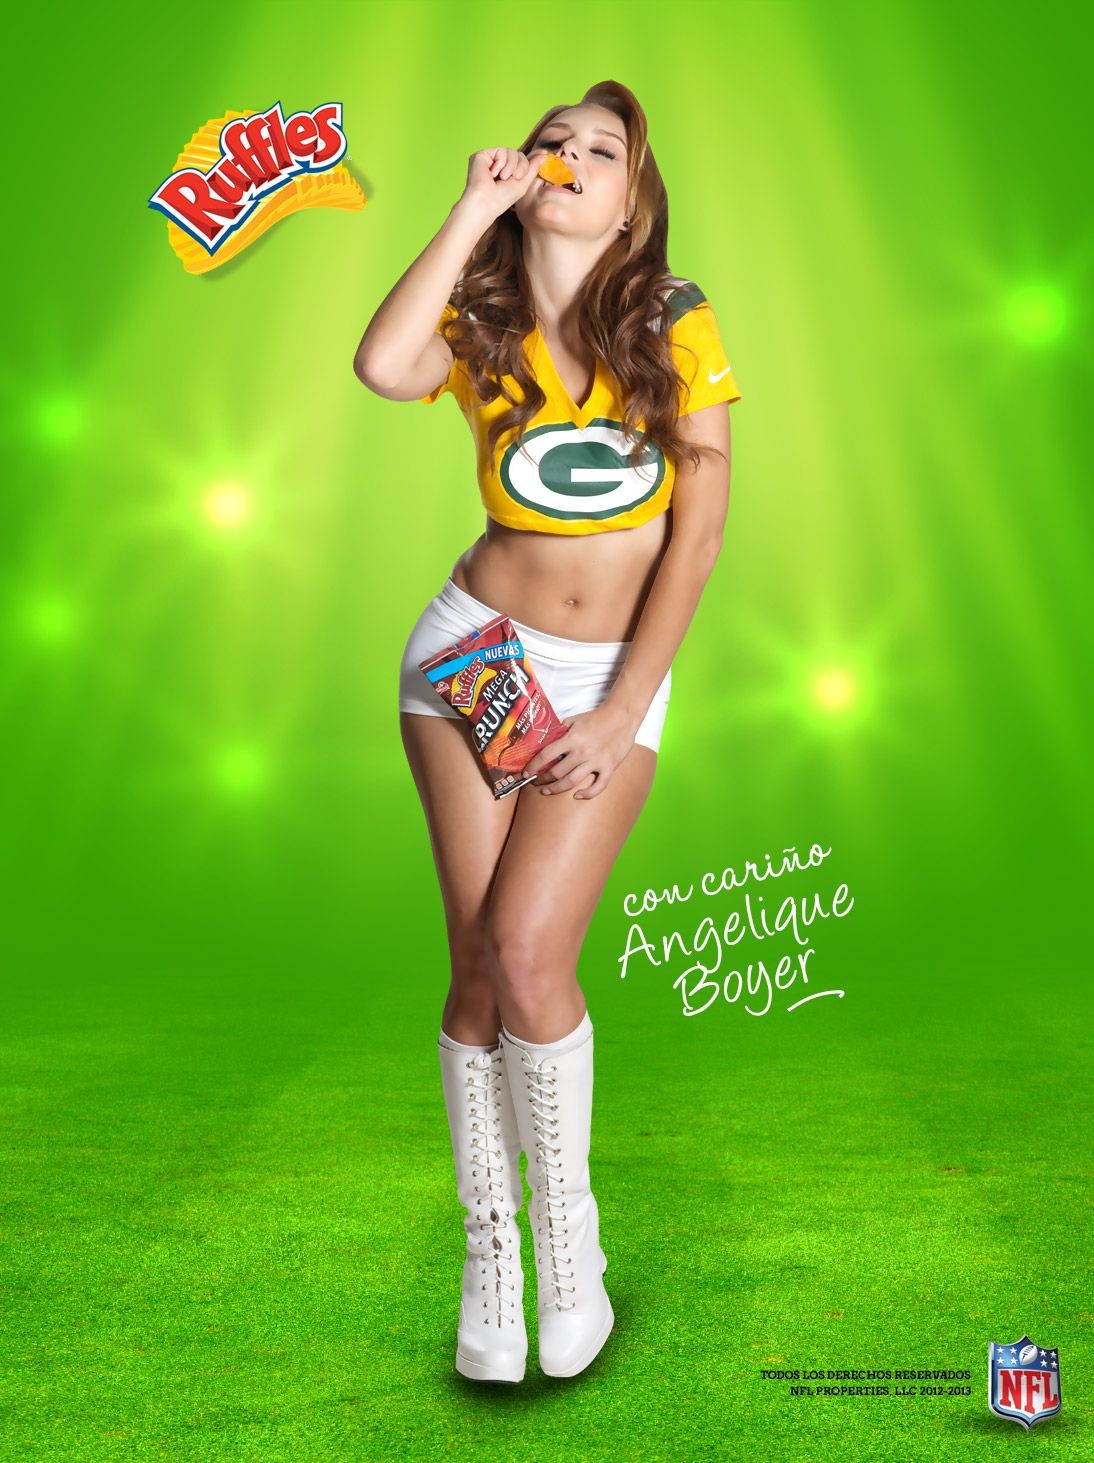 Angelique Boyer trägt sexy Trikot Look-alike Outfits in nfl Promos
 #75243011